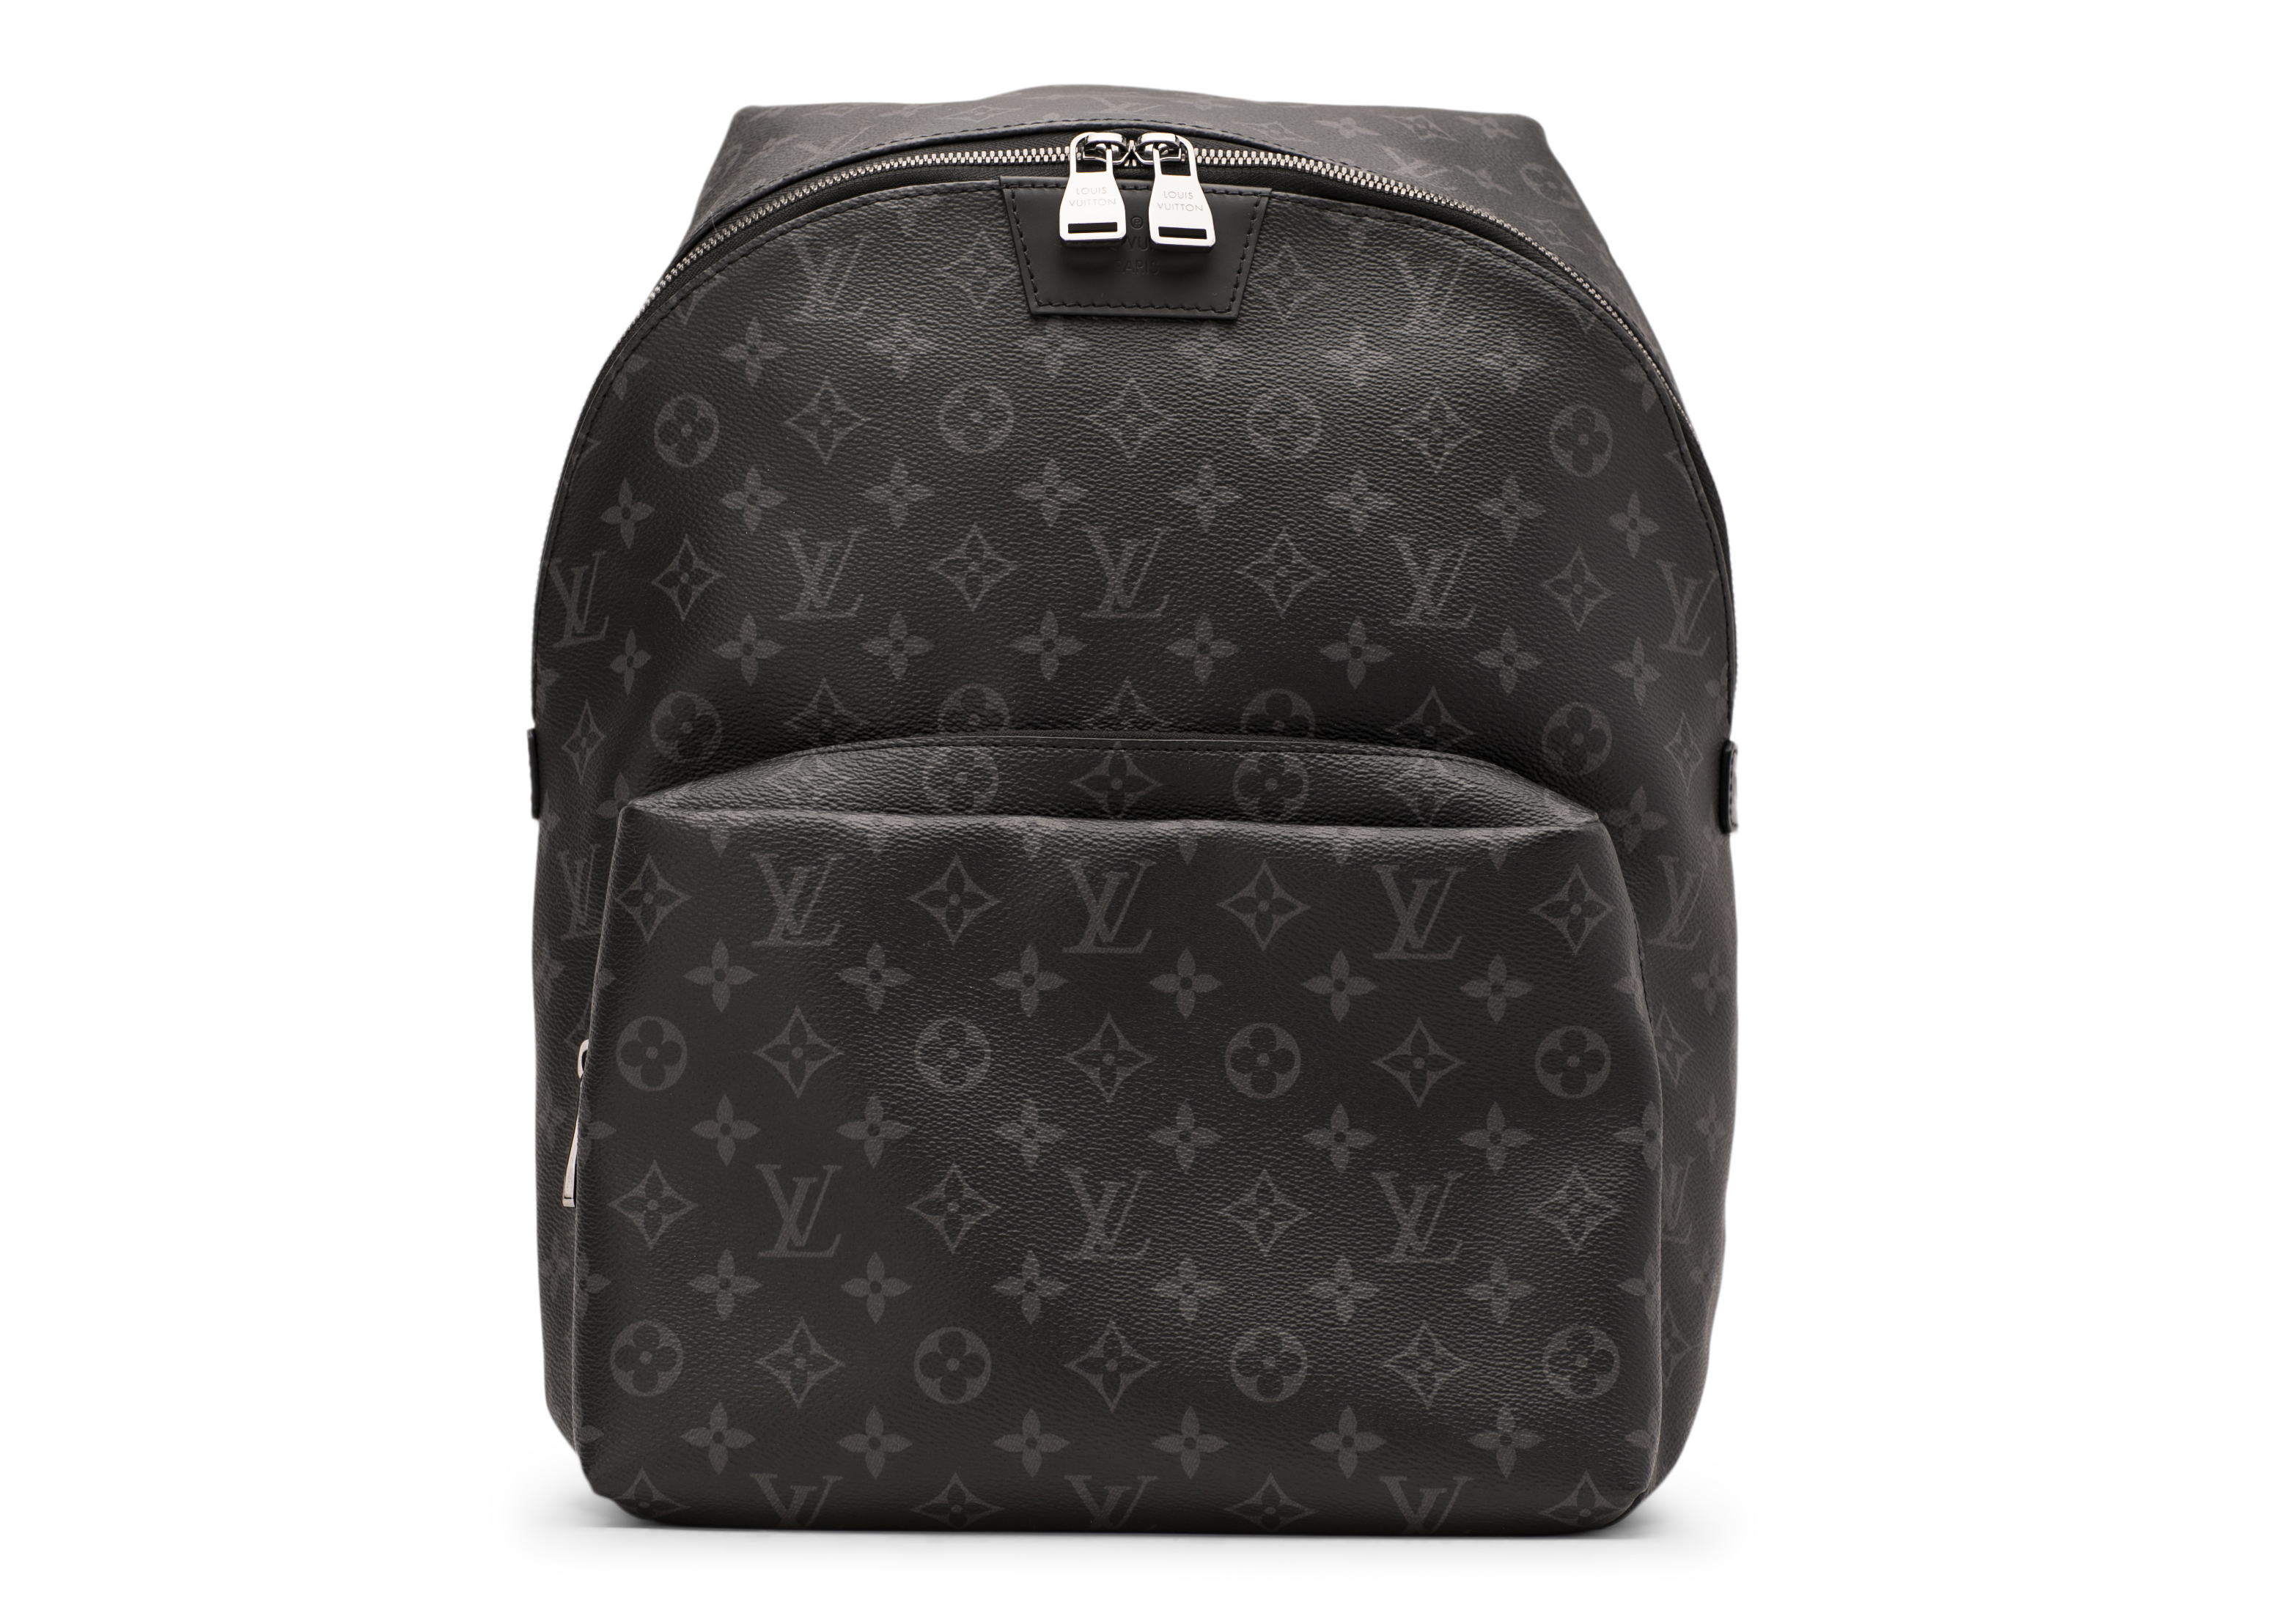 Authentic LOUIS VUITTON Josh backpack Damier Graphite Black Gray N41473  Preowned  eBay